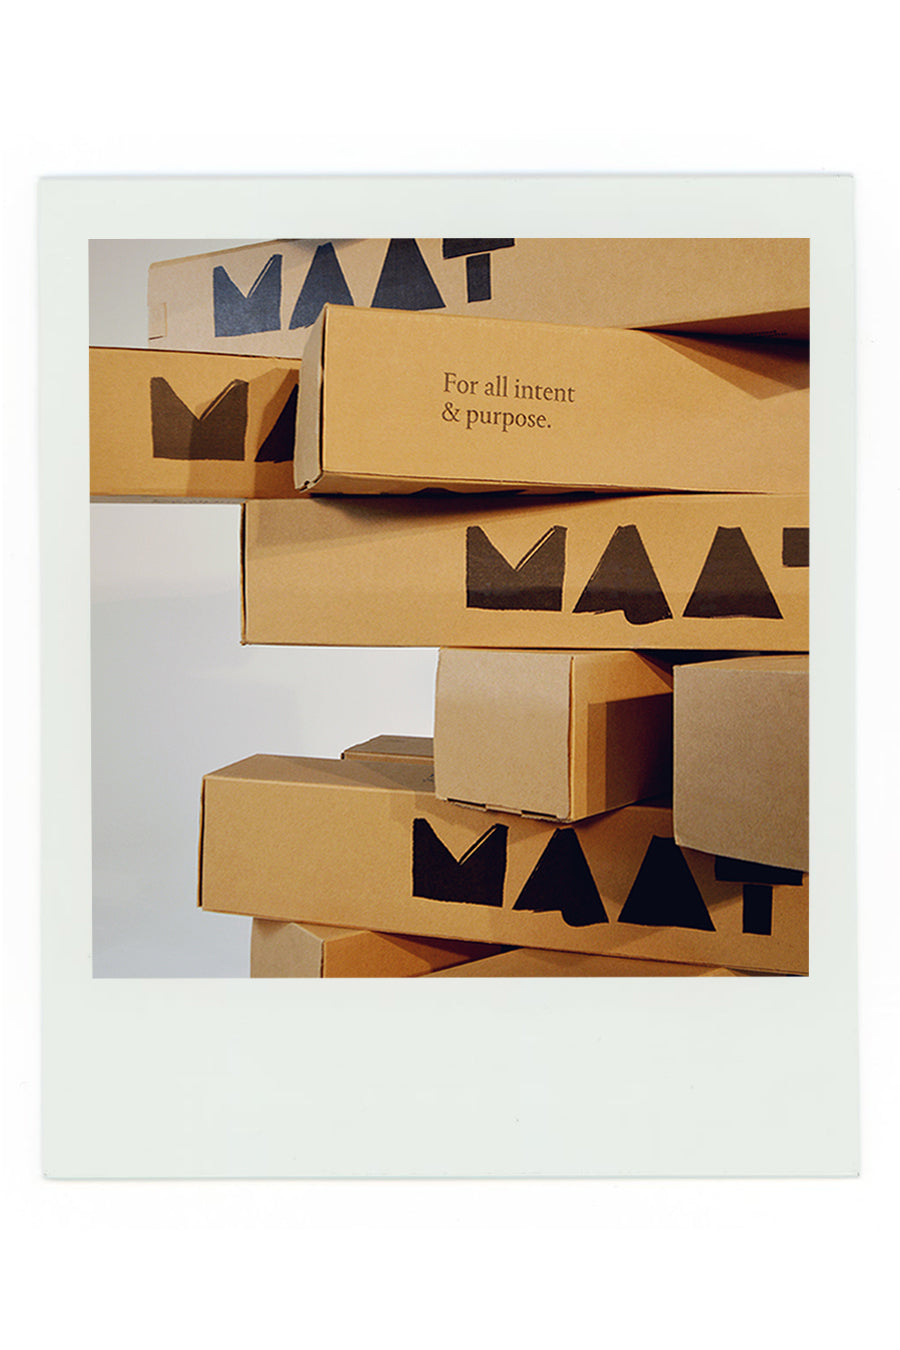 MAAT packaging boxes with wording 